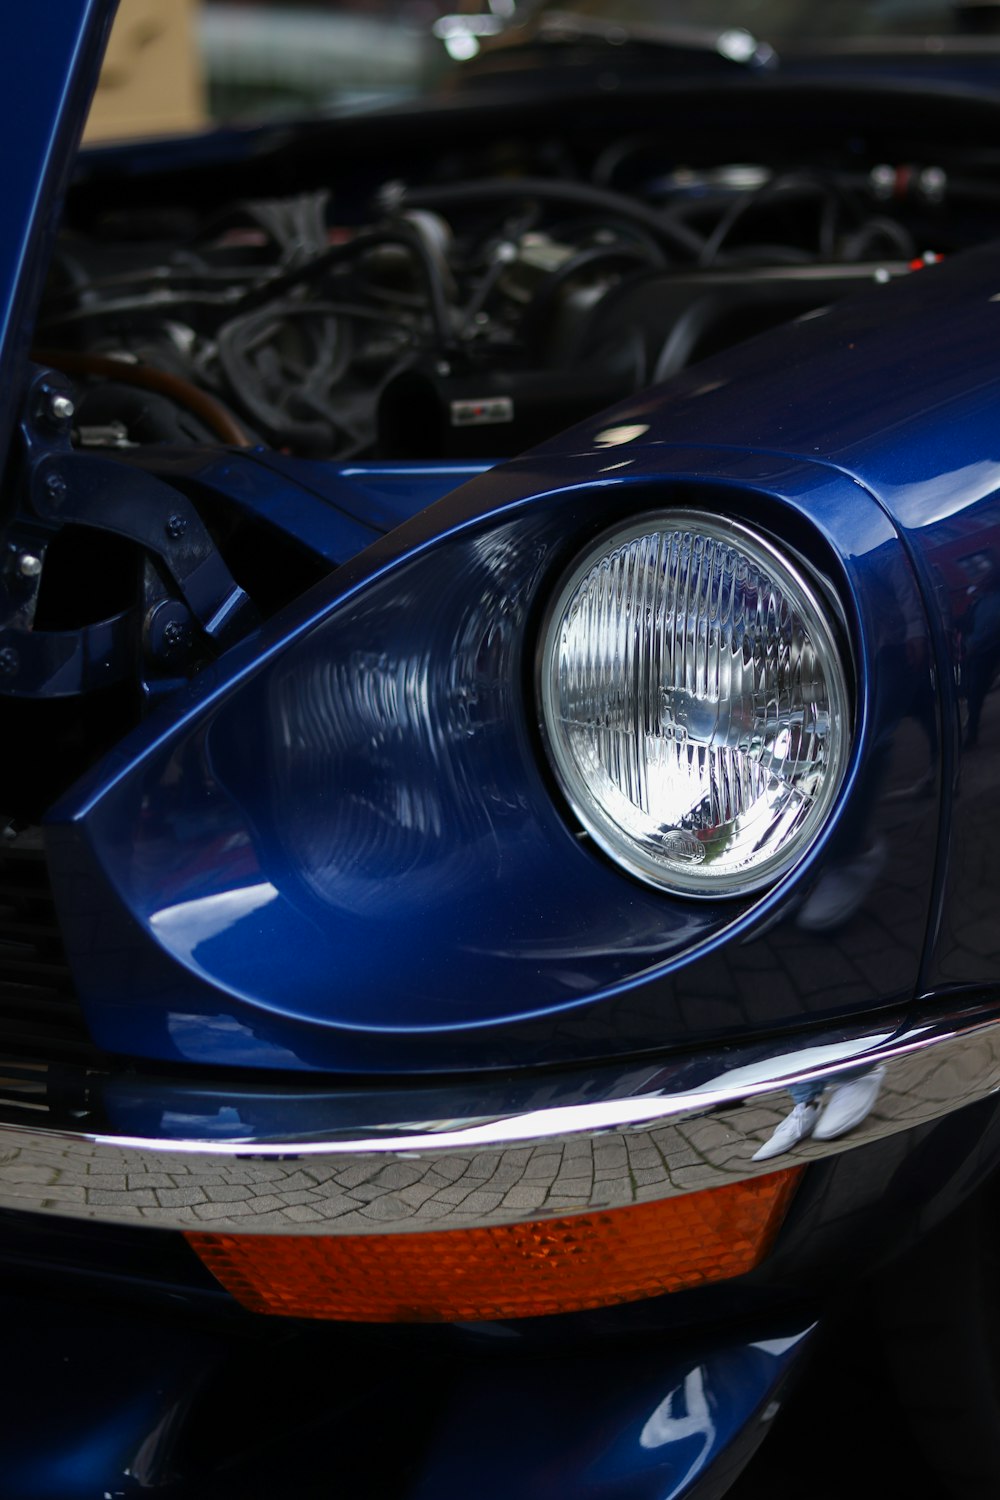 a close up of a car's headlight and engine